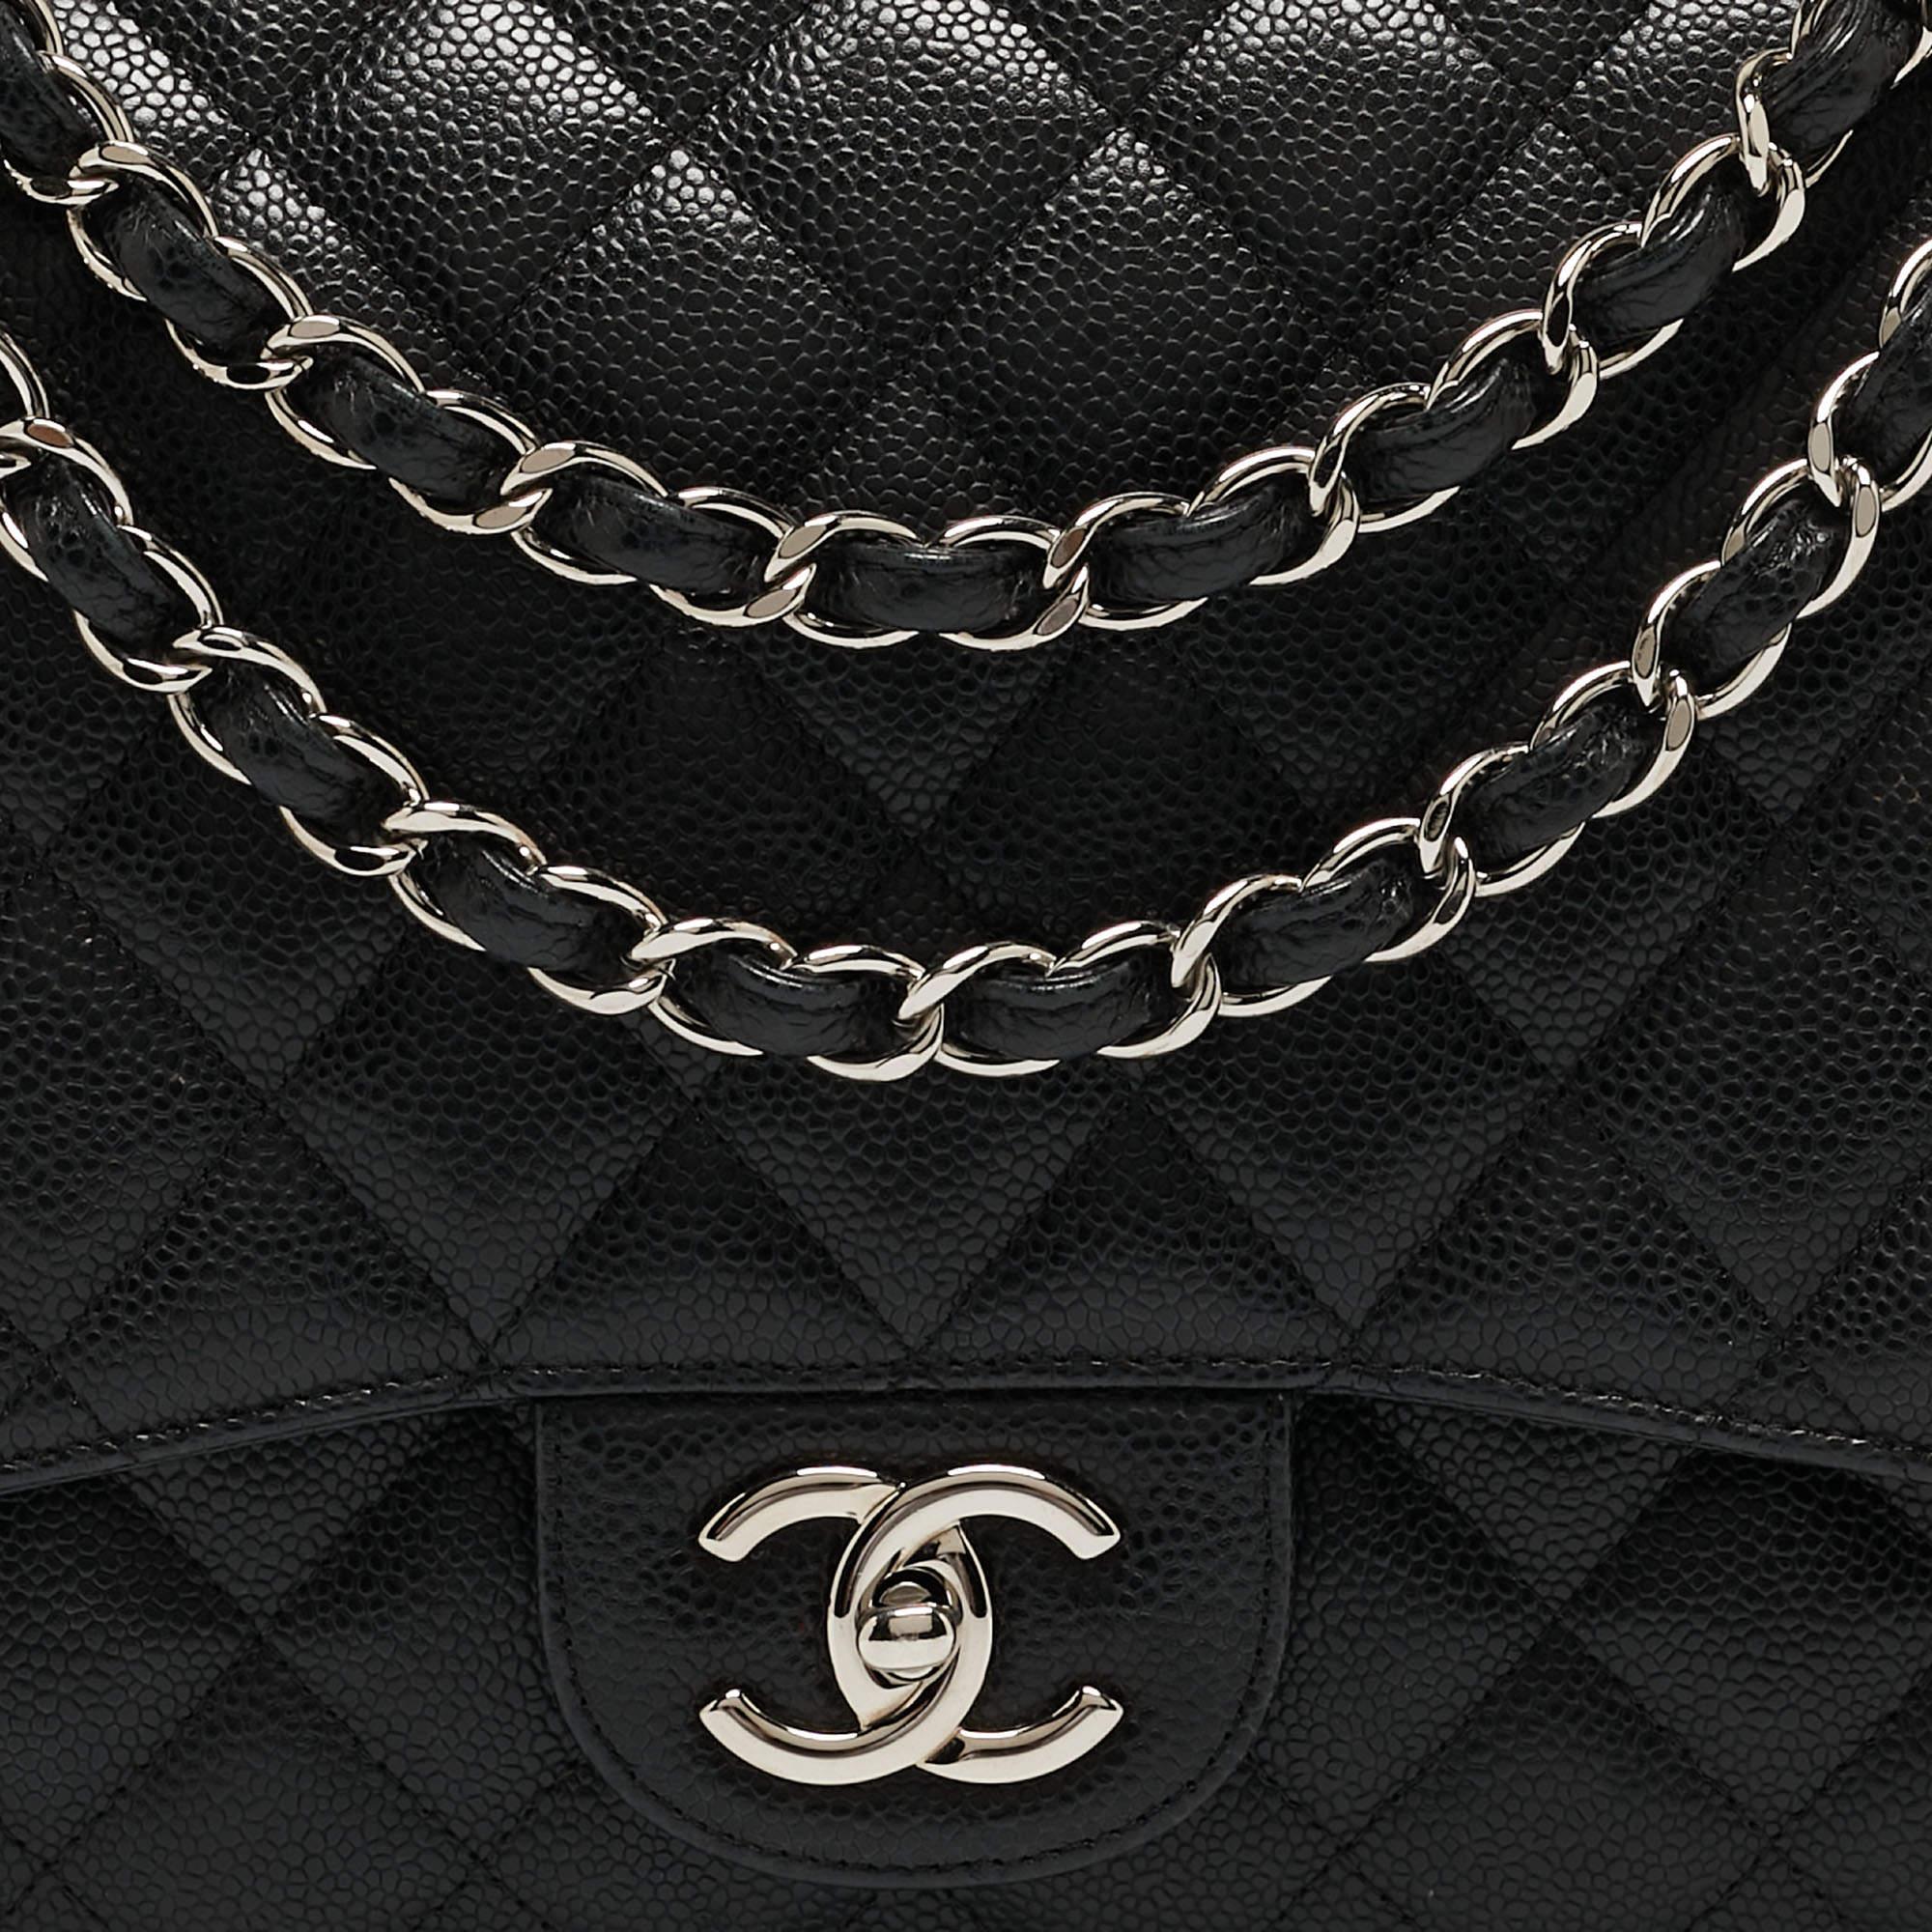 Chanel Black Quilted Caviar Leather Maxi Classic Double Flap Bag For Sale 14